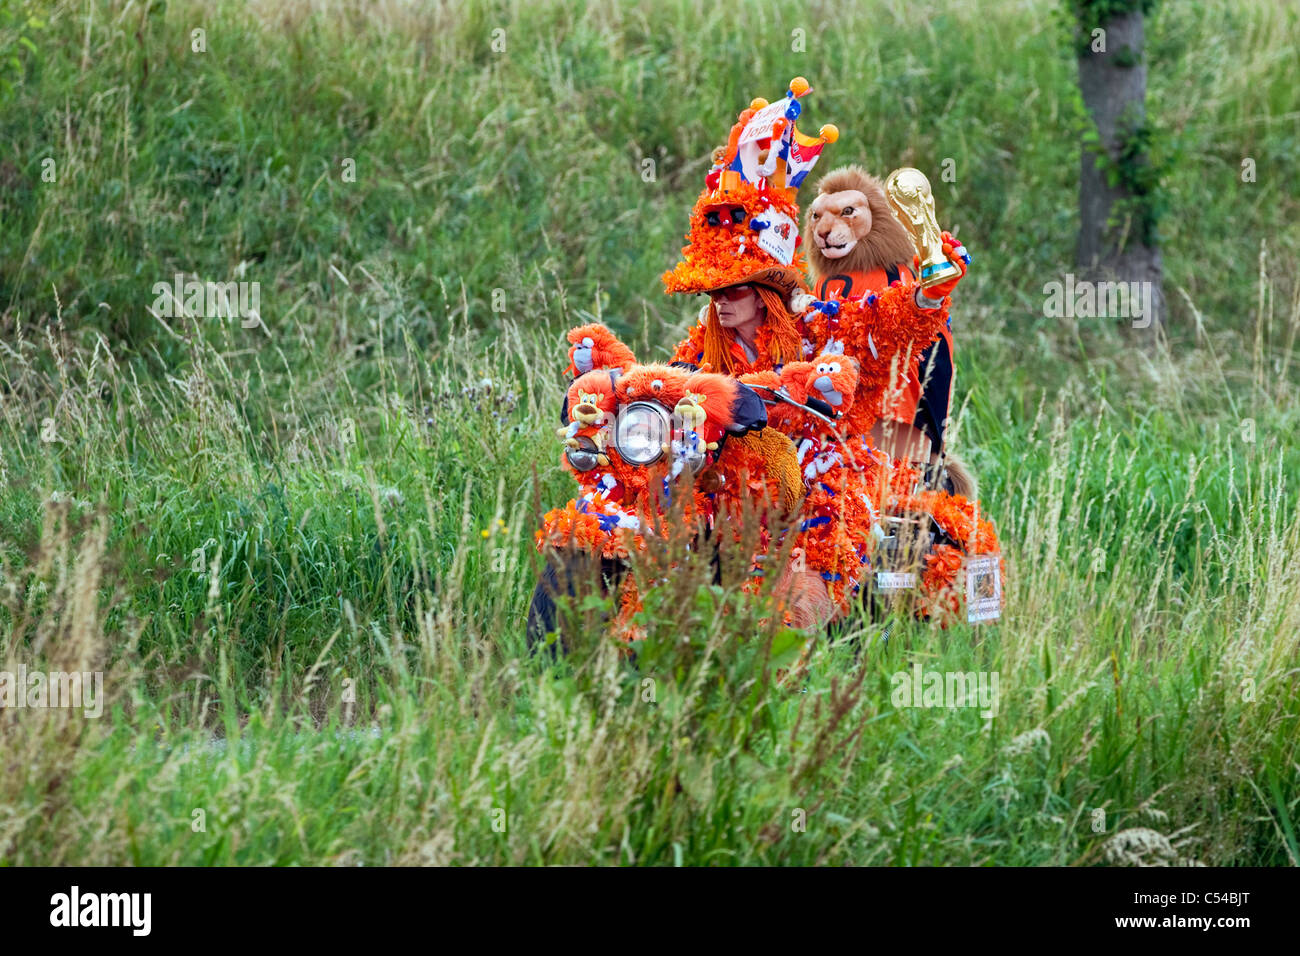 World Cup Football July 2010. Motorcycle and driver decorated in orange, supporter Dutch national team. Holding replica of cup Stock Photo